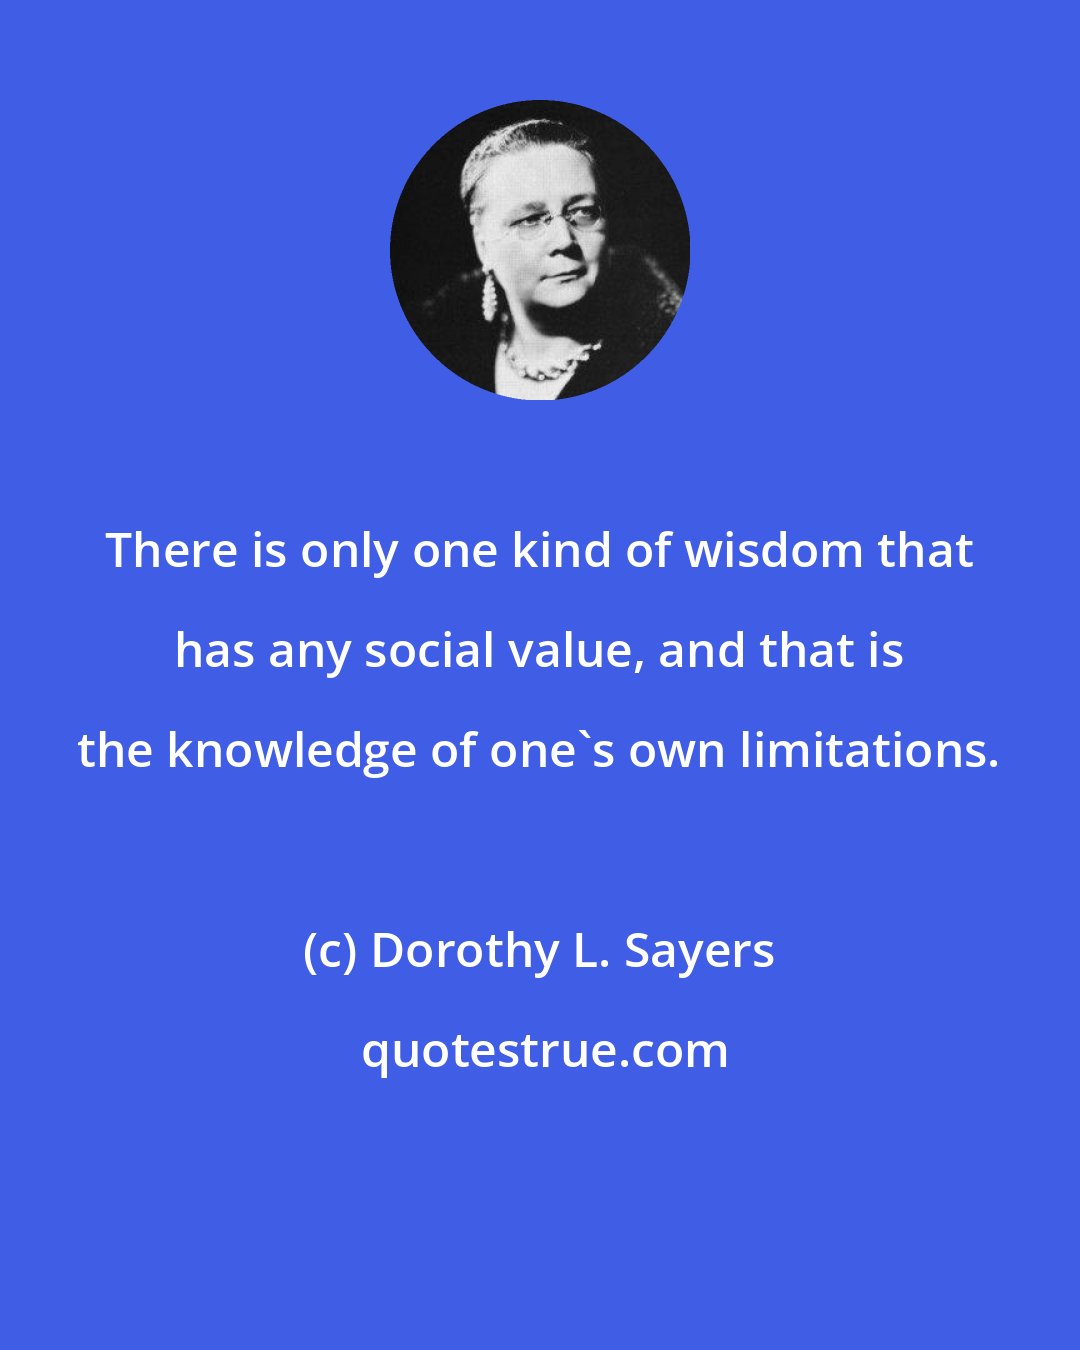 Dorothy L. Sayers: There is only one kind of wisdom that has any social value, and that is the knowledge of one's own limitations.